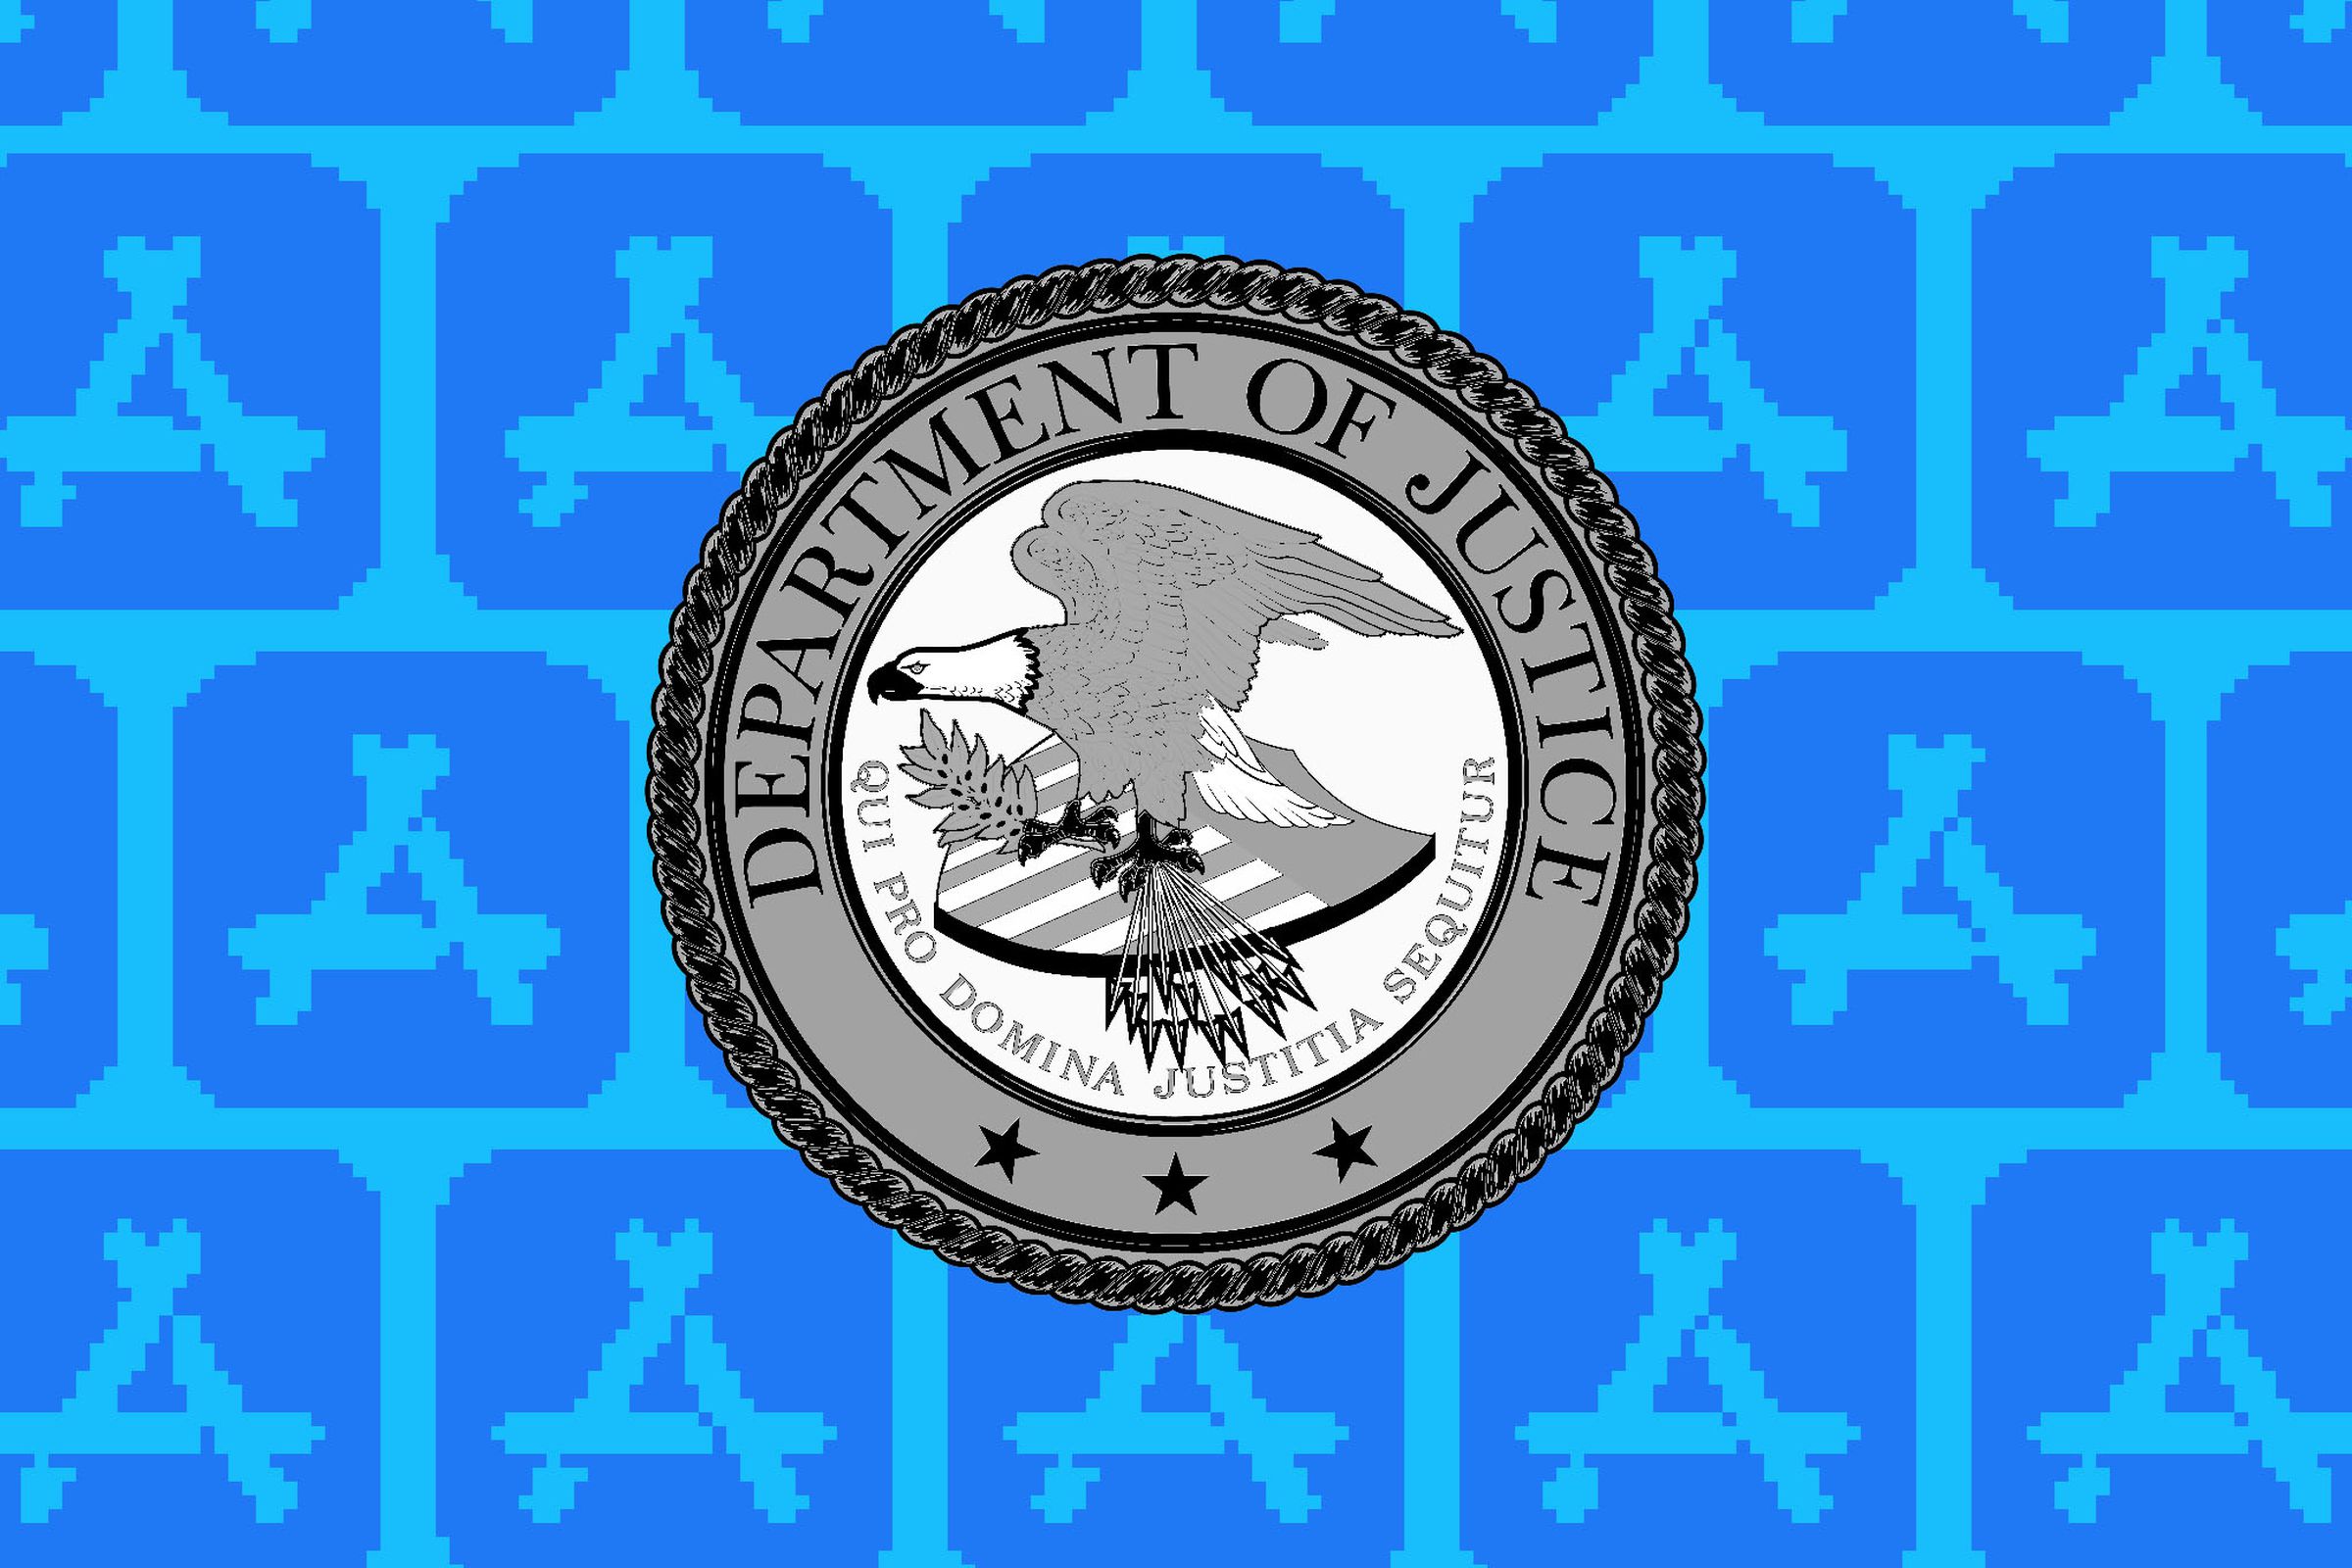 Photo collage of the Department of Justice seal in front of the App Store logo.